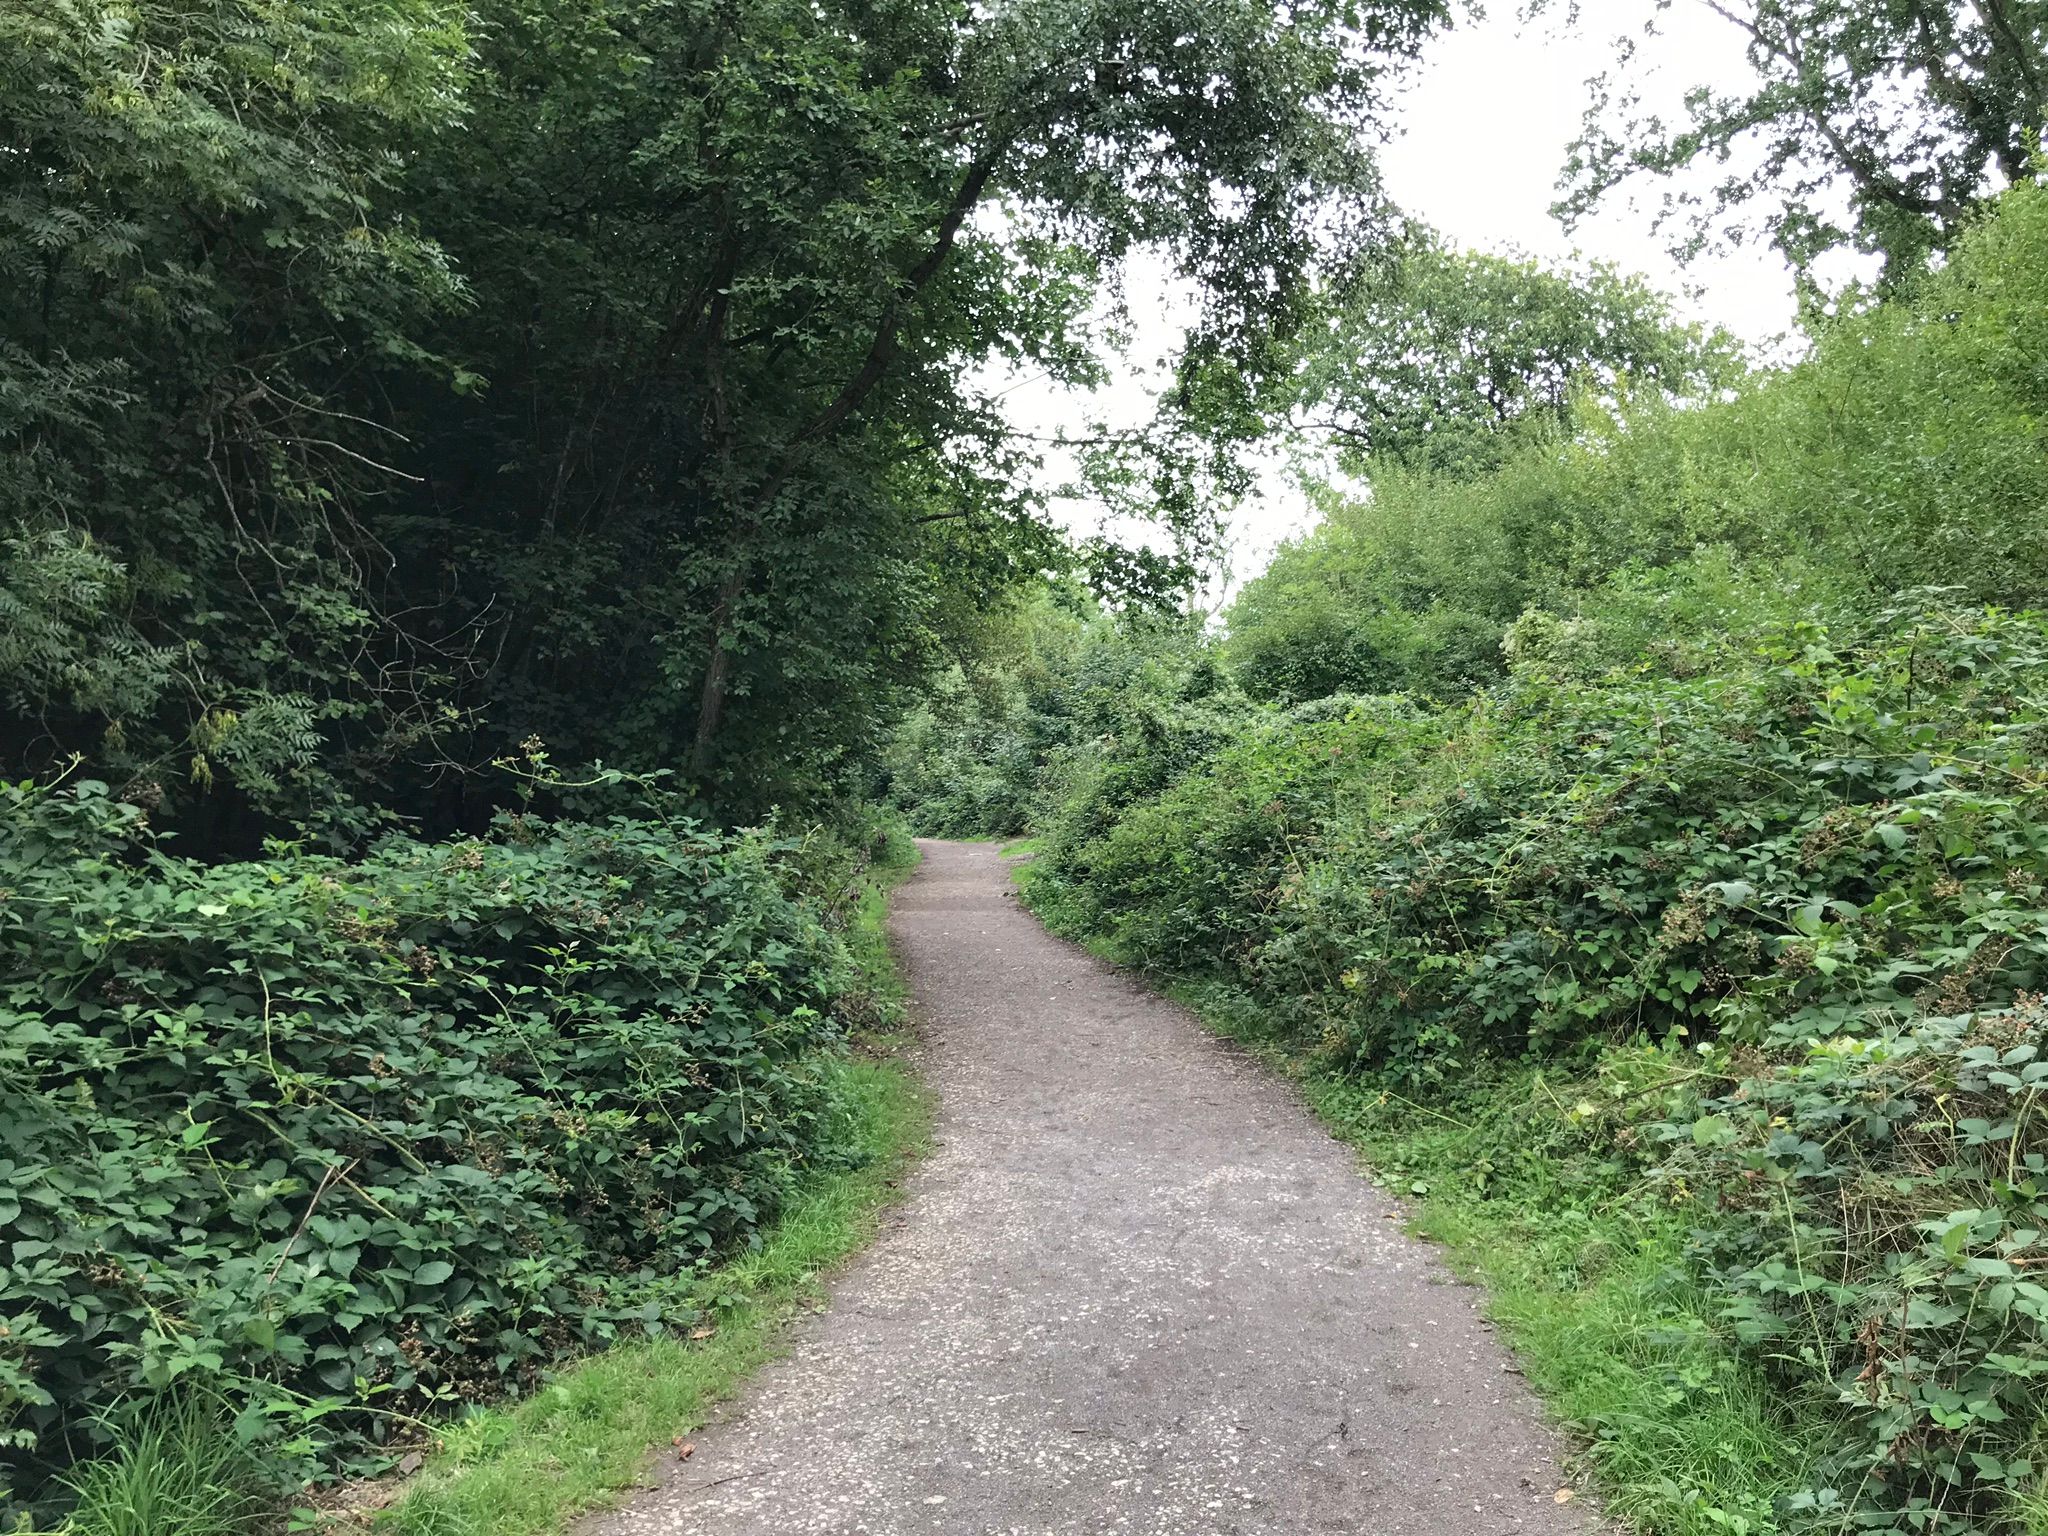 The wide gravel paths that allow easy access on the Woodland Walk at Trosley Country Park